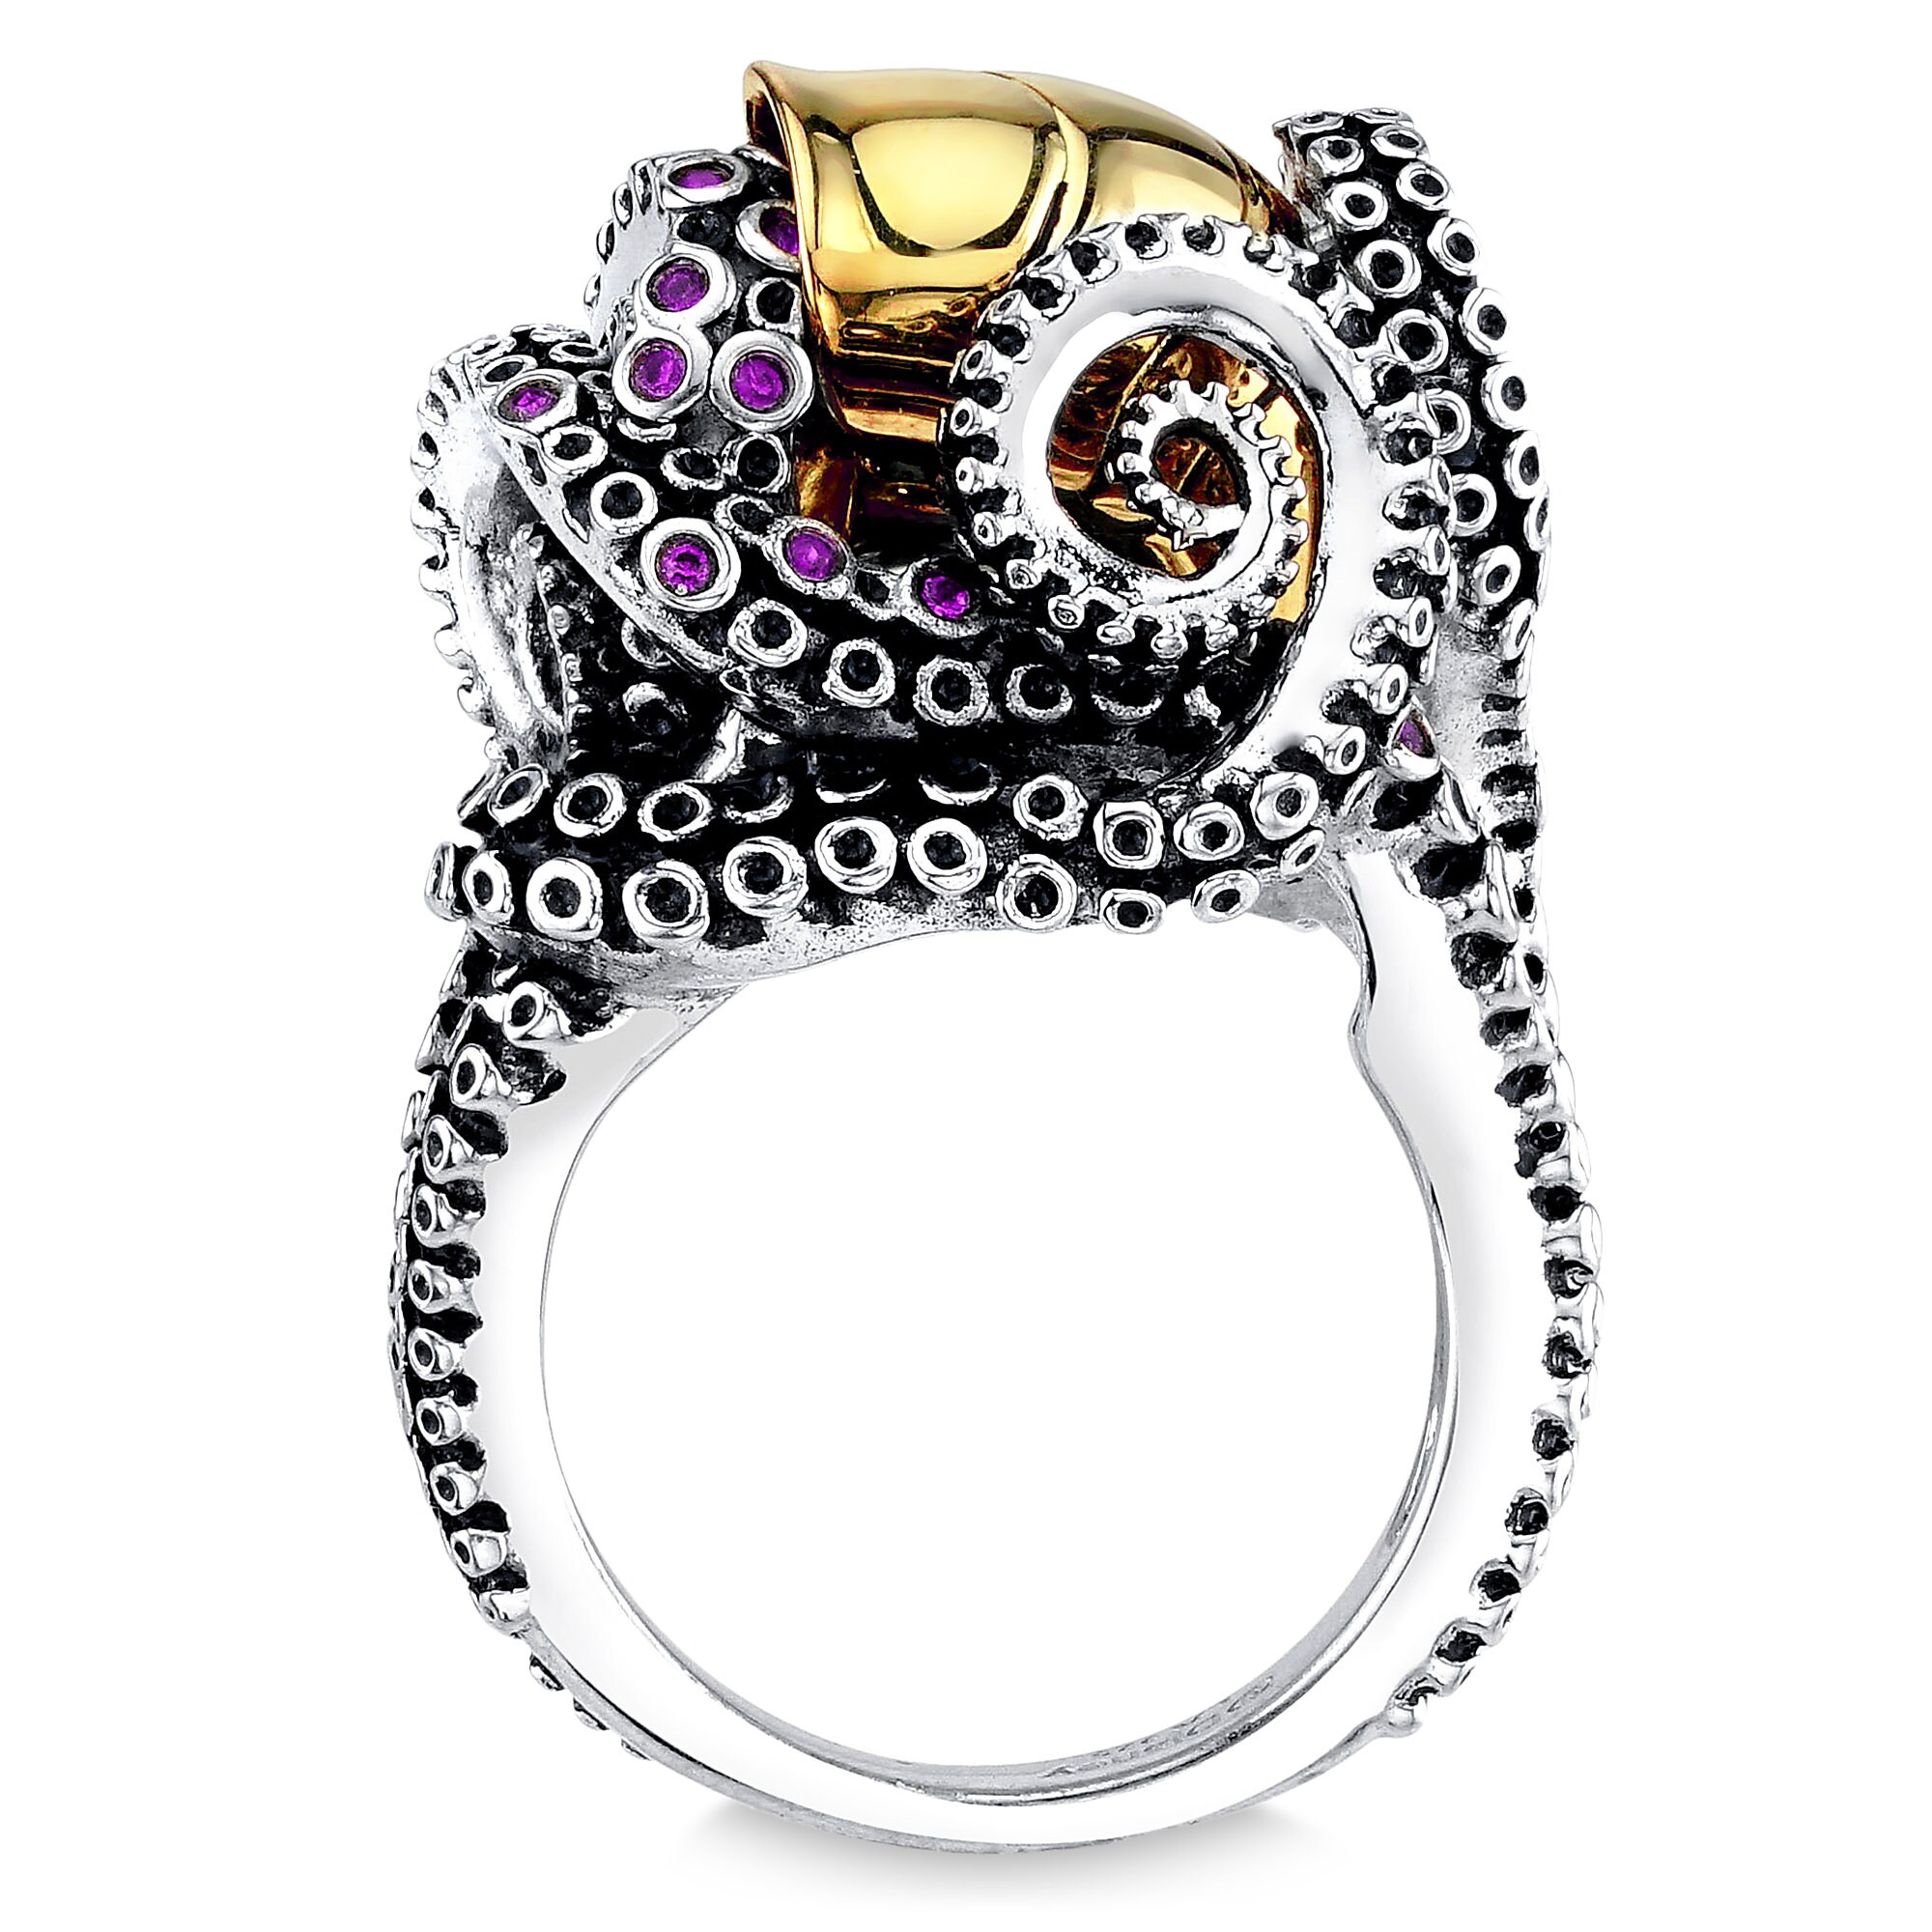 Ursula Tentacle Ring by RockLove - The Little Mermaid